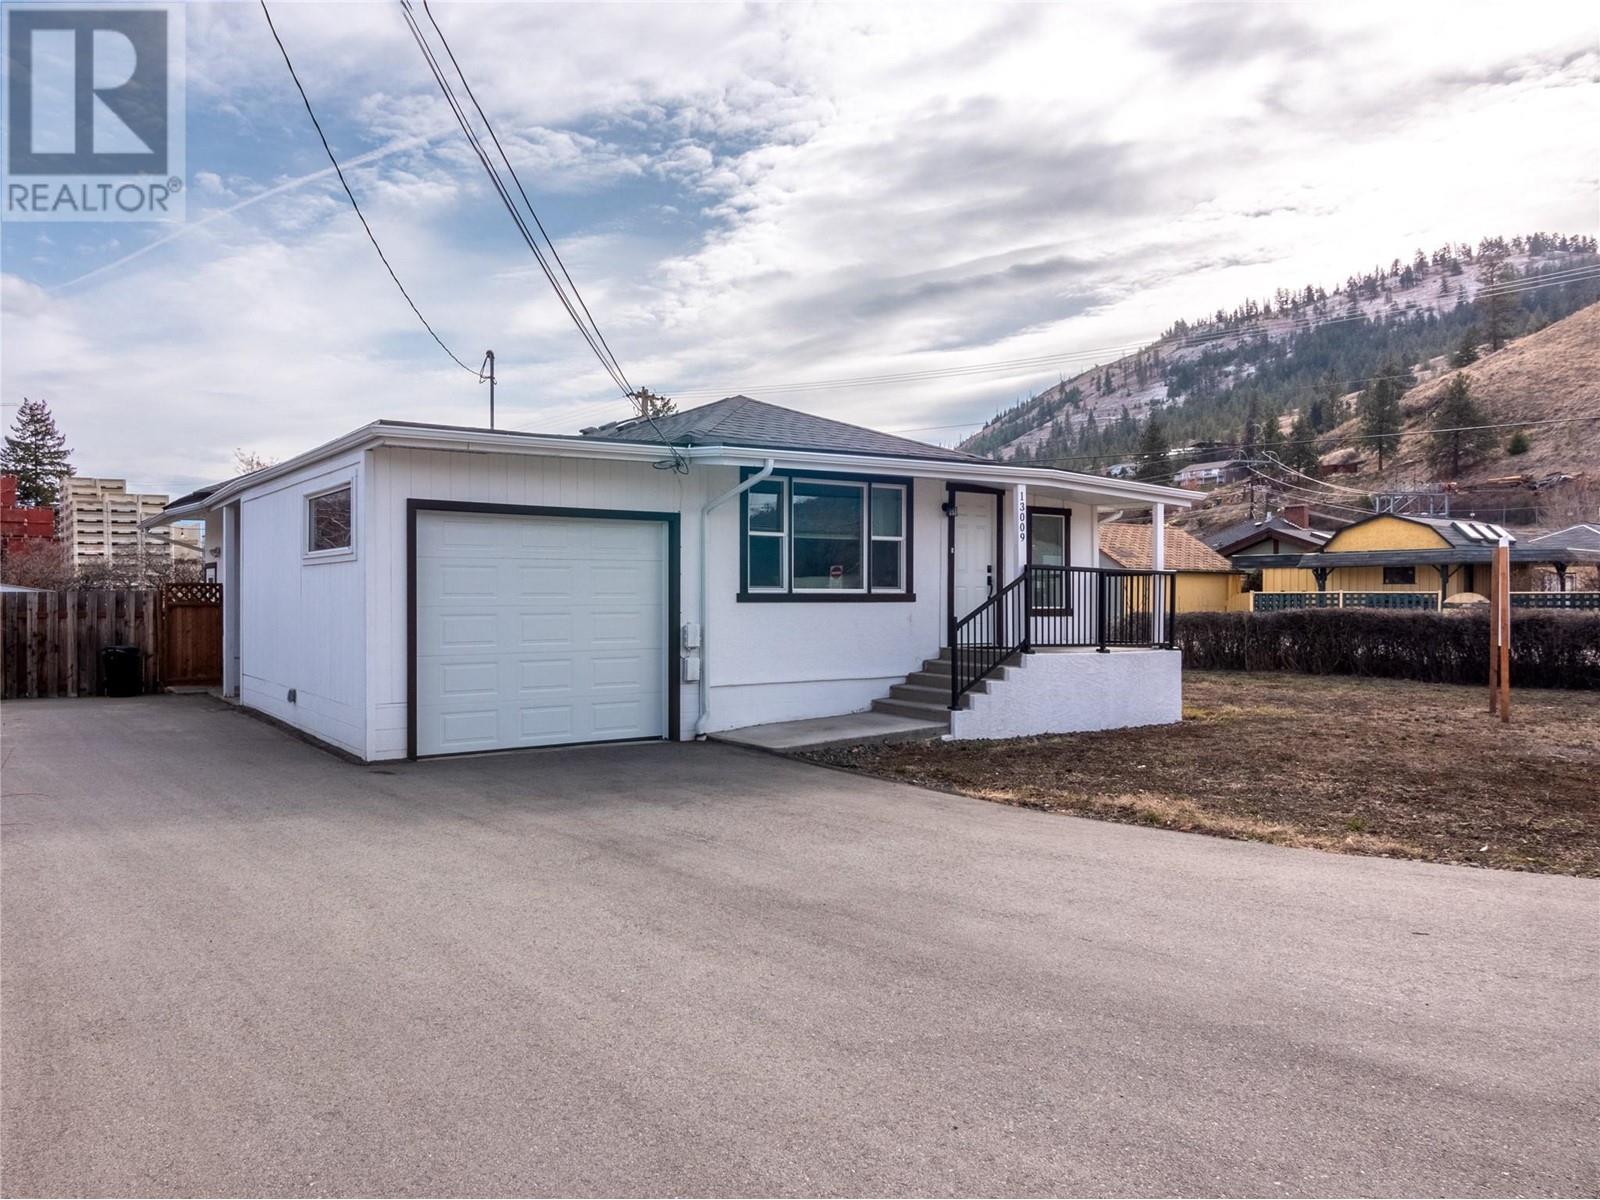 13009 Armstrong Avenue, Summerland, British Columbia  V0H 1Z0 - Photo 1 - 10311500